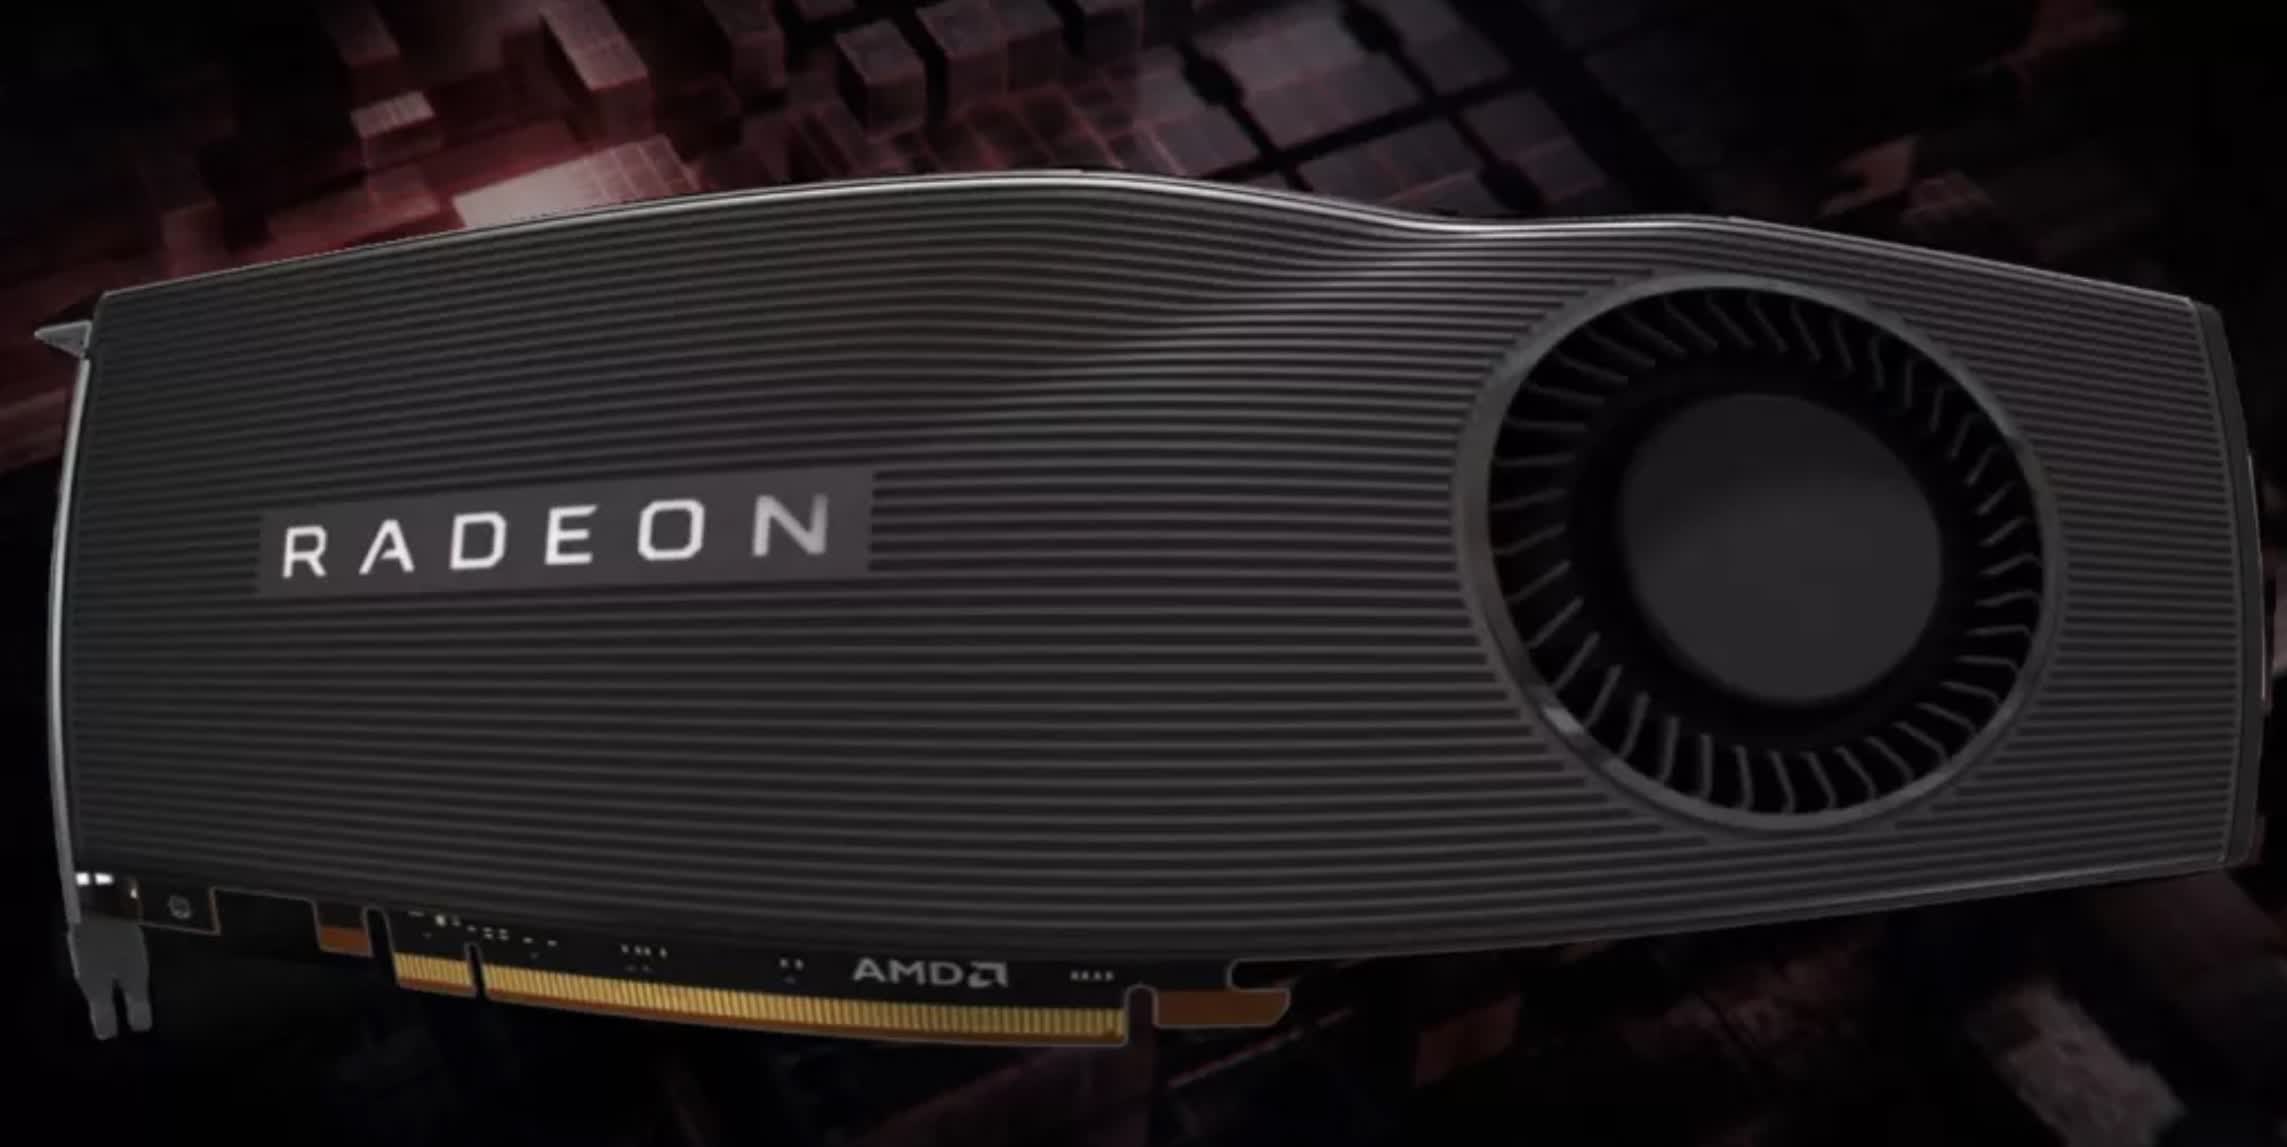 Radeon 6000 Easter egg discovered in Fortnite, 16GB card rumored to undercut RTX 3080